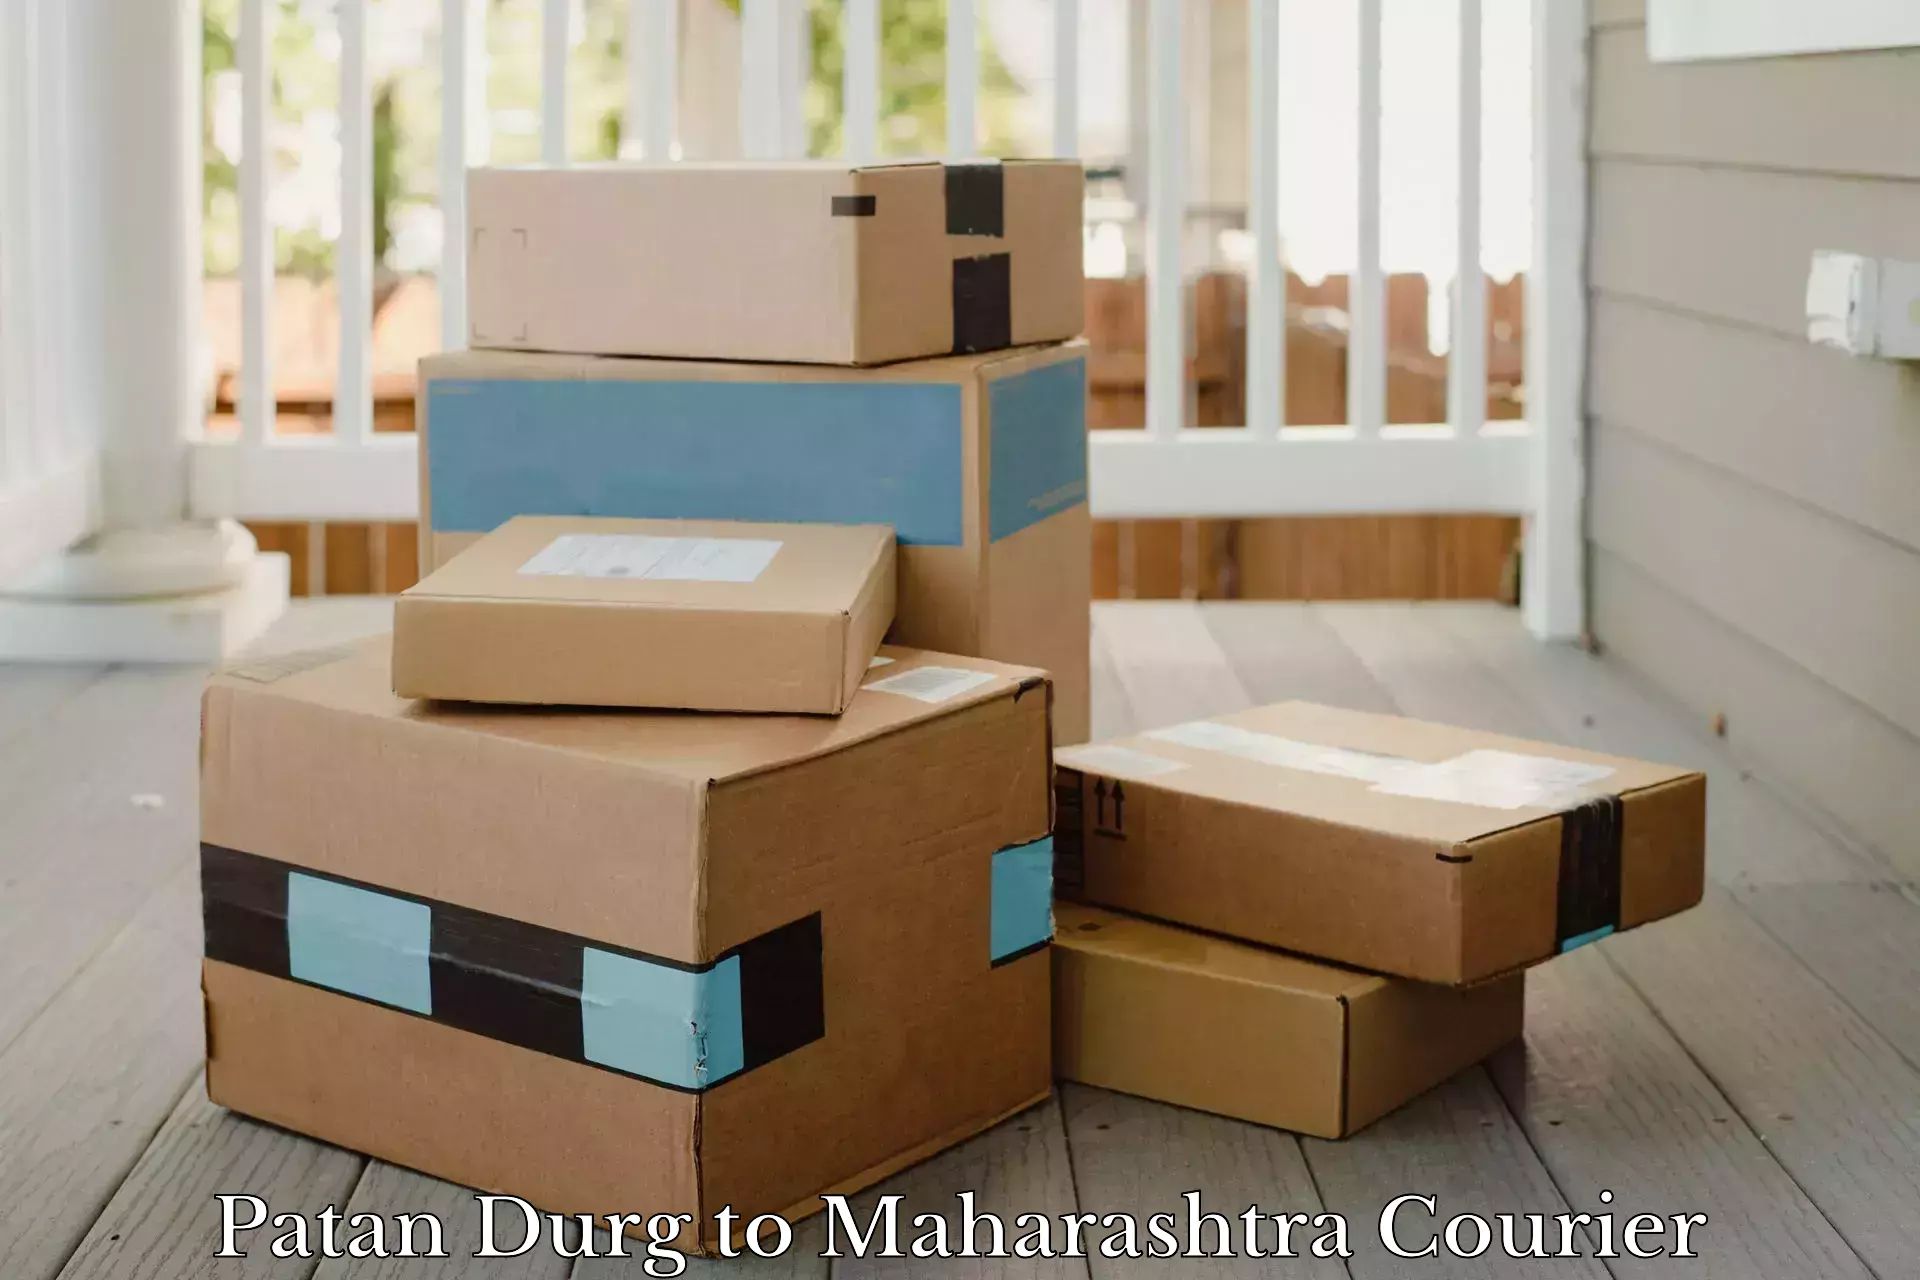 Round-the-clock parcel delivery Patan Durg to Maharashtra